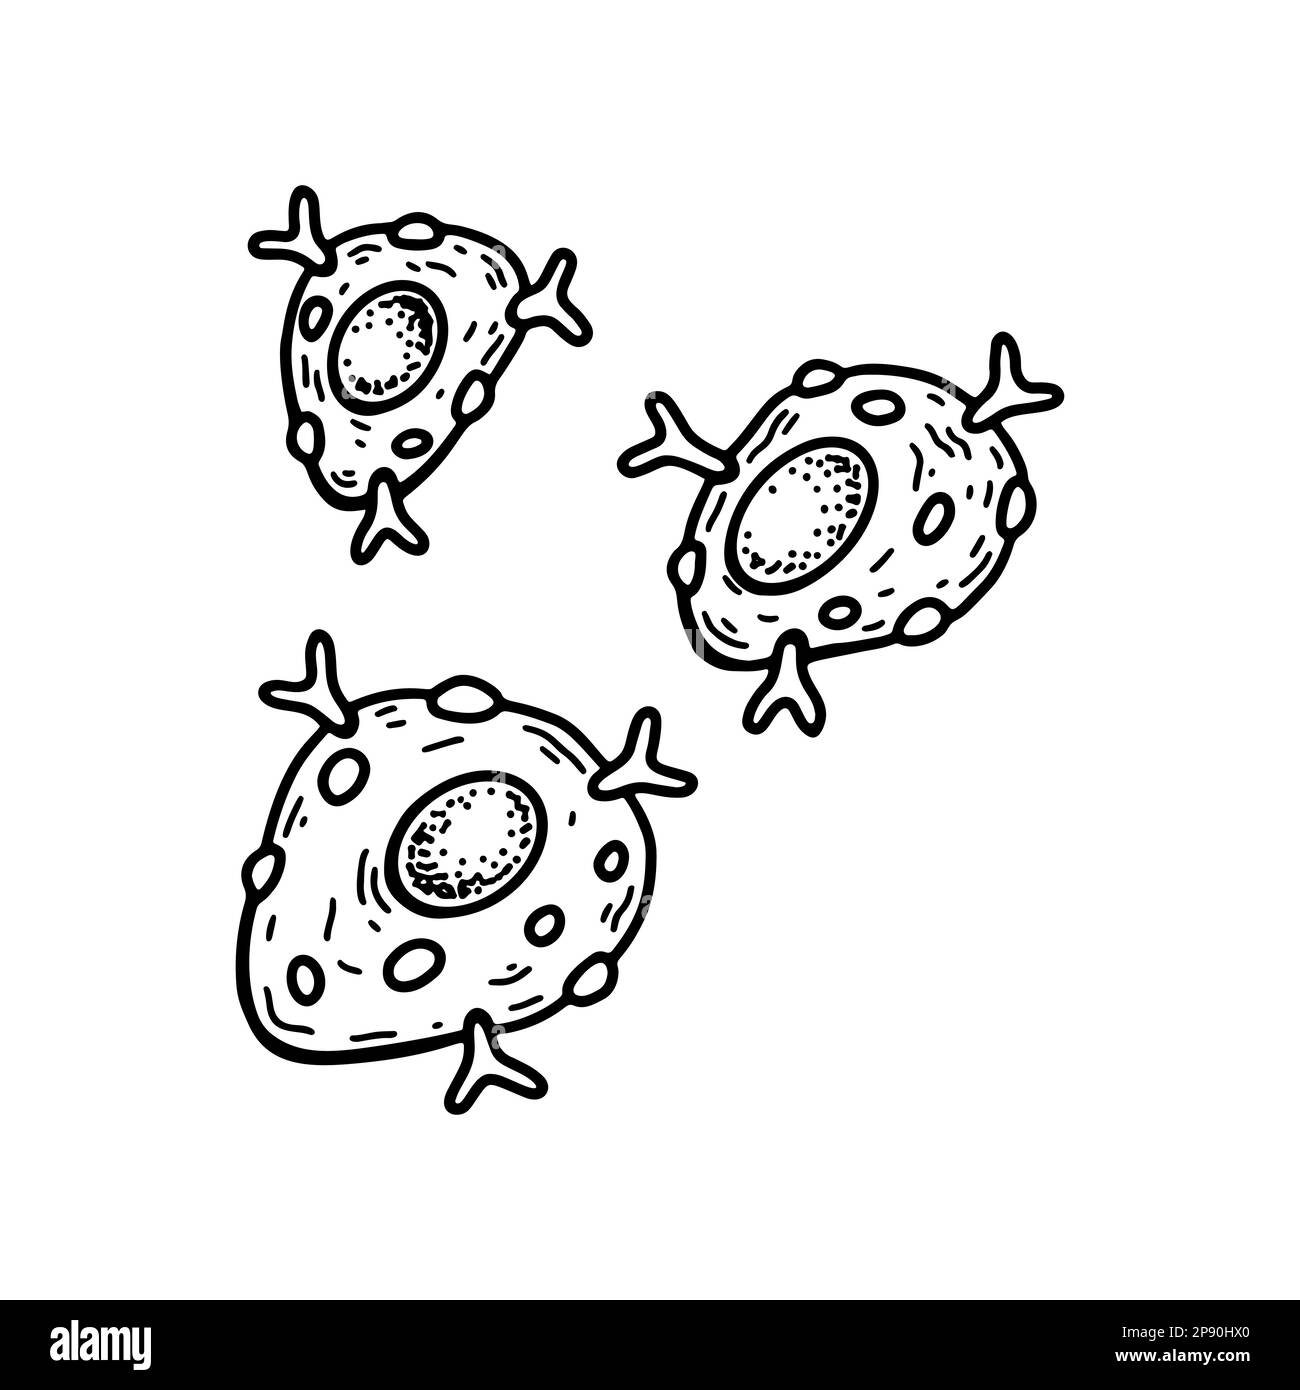 Mast cell isolated on white background. Hand drawn scientific microbiology vector illustration in sketch style Stock Vector